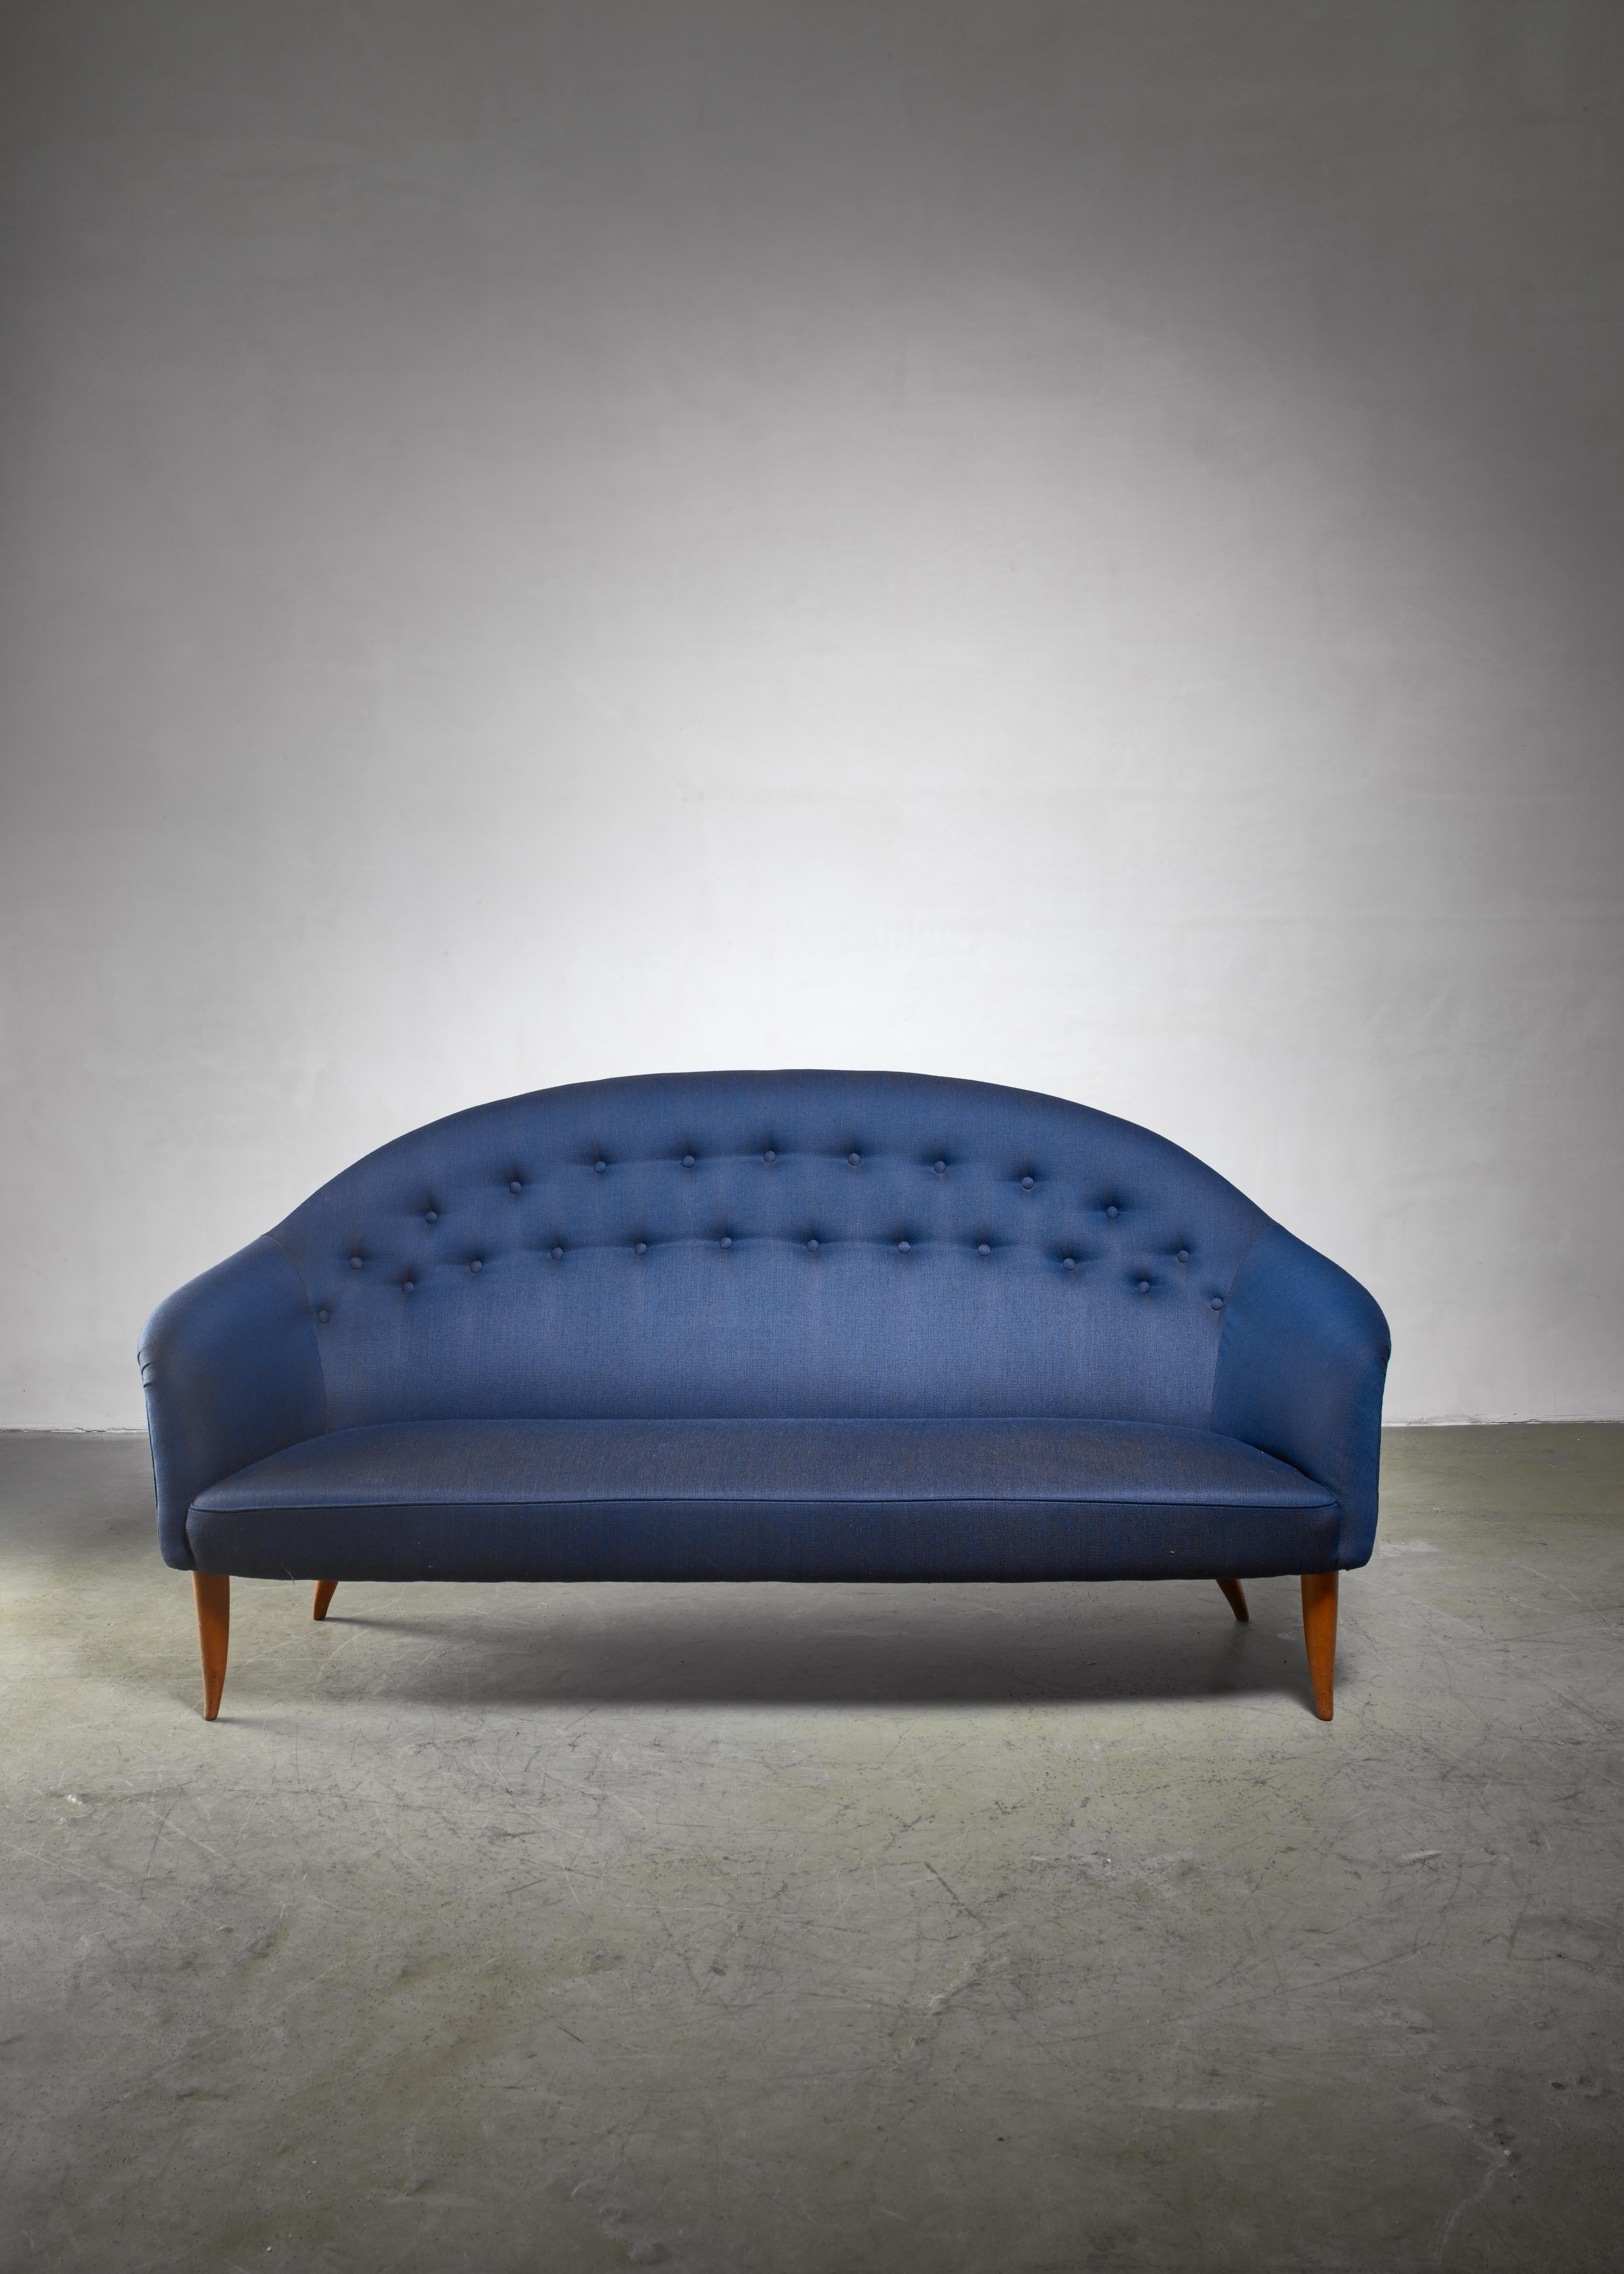 A three-seater 'Paradiset' sofa from the 'Triva' series by Kerstin Hörlin-Holmquist for Nordiska Kompaniet. It has been newly upholstered with a blue 'Balder' fabric by Fanny Arenden.